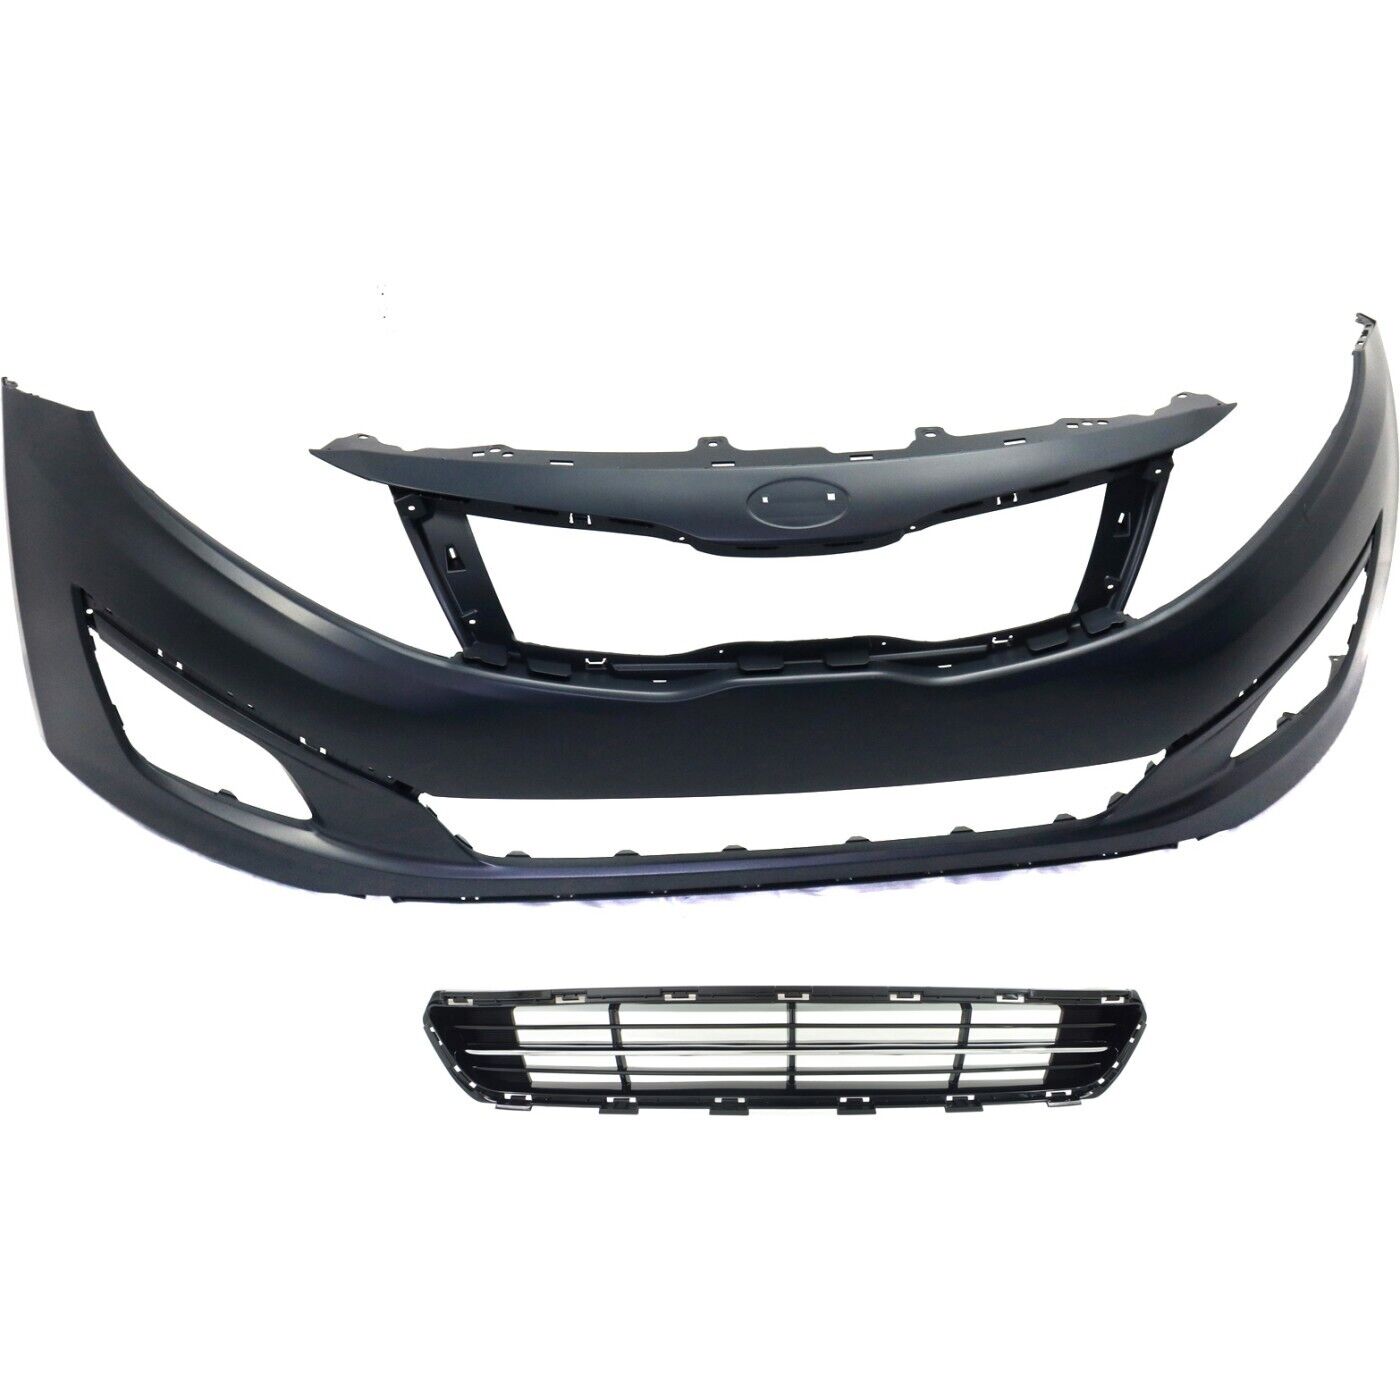 Bumper Cover and Grille Kit For 2014-2015 Kia Optima Front USA Built Primed